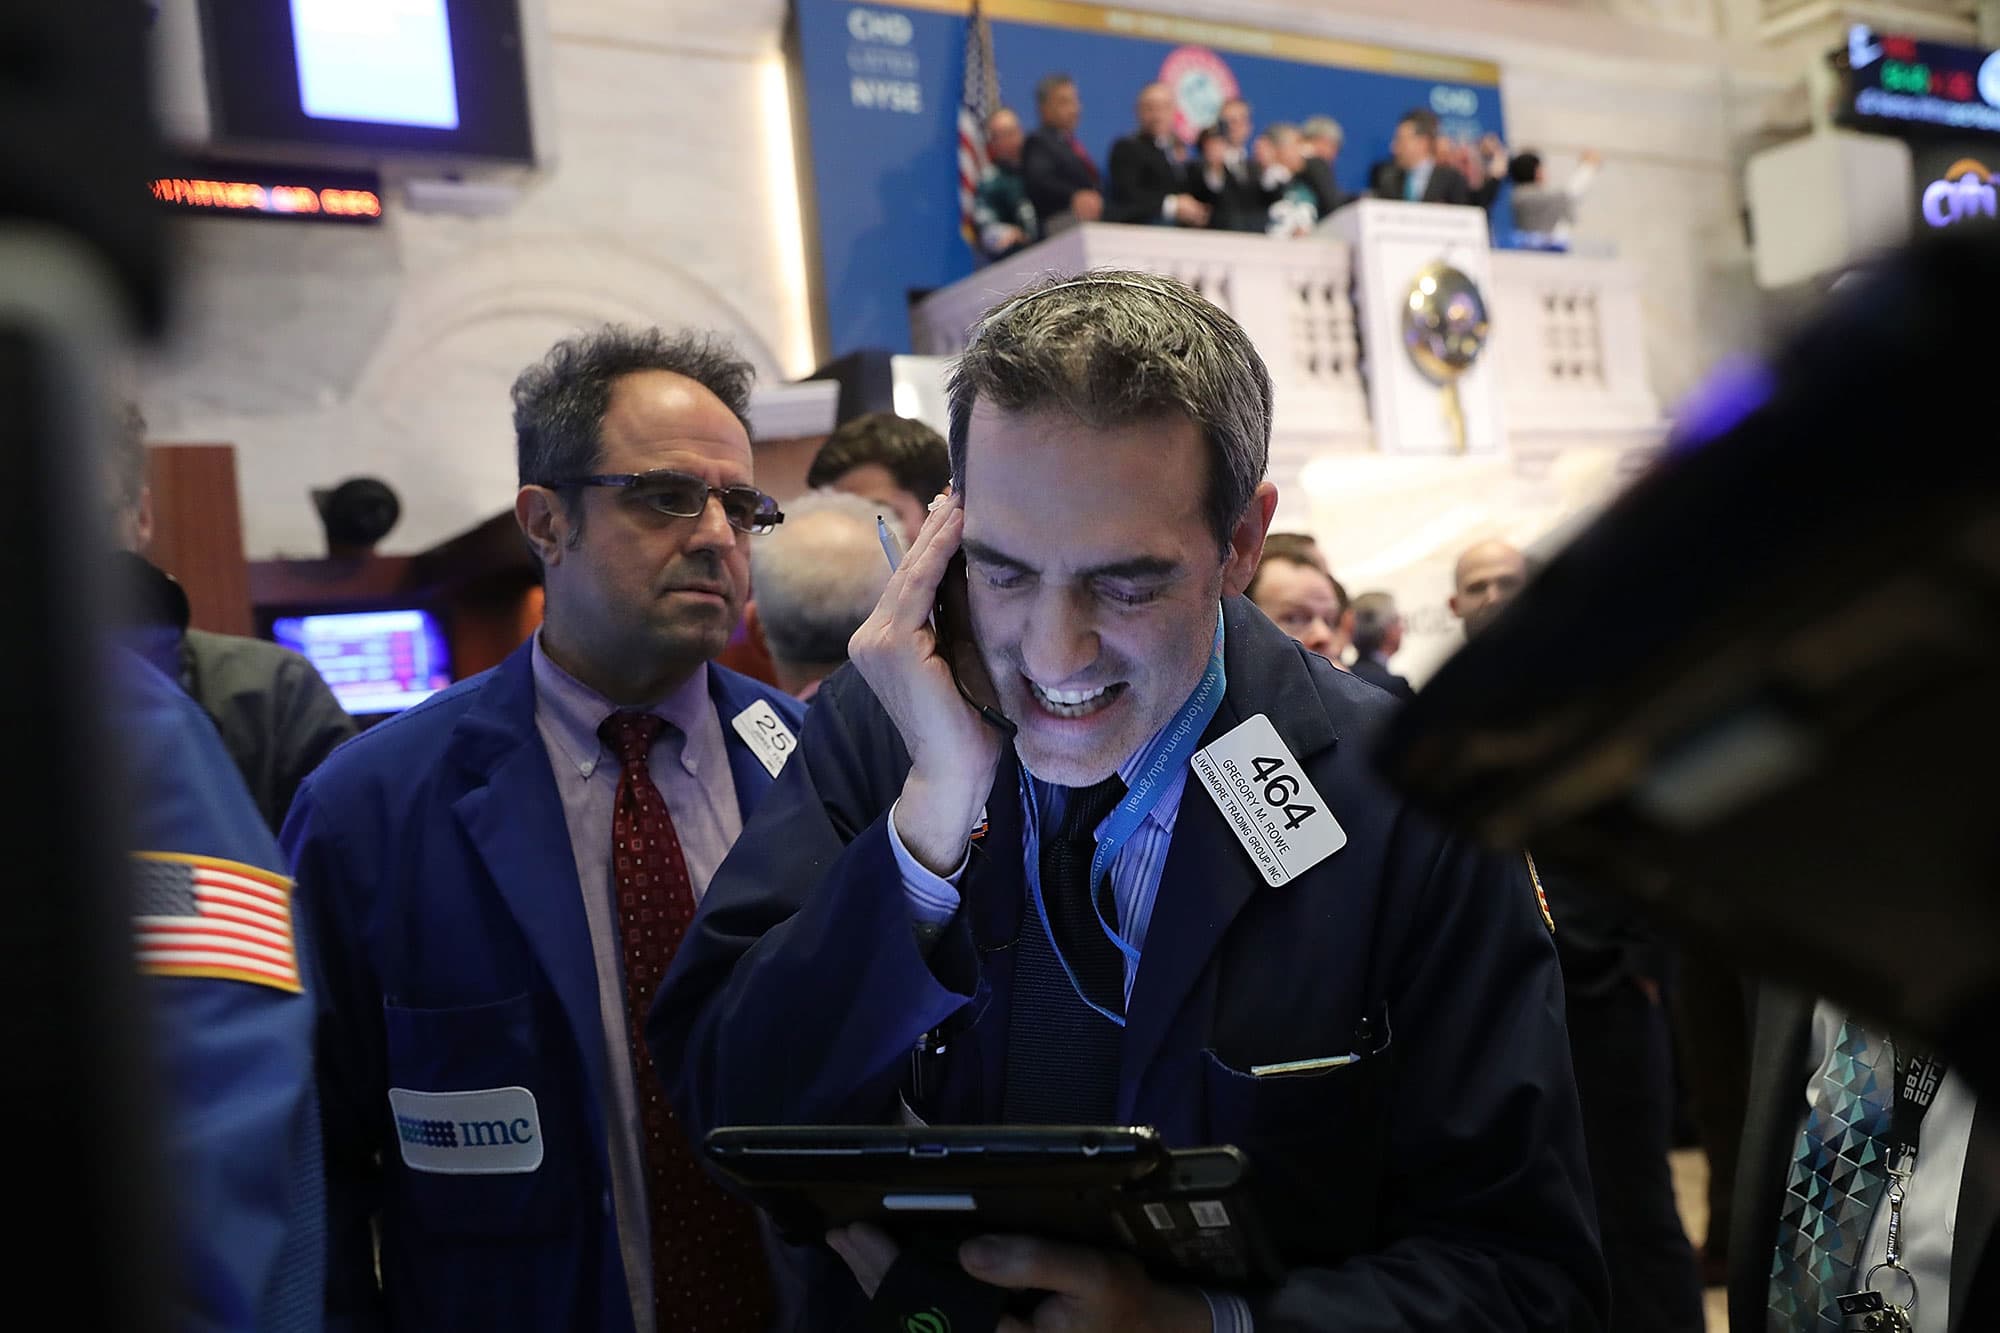 The S&P 500 is on track for its worst January ever. Here’s why stocks are getting hit so hard